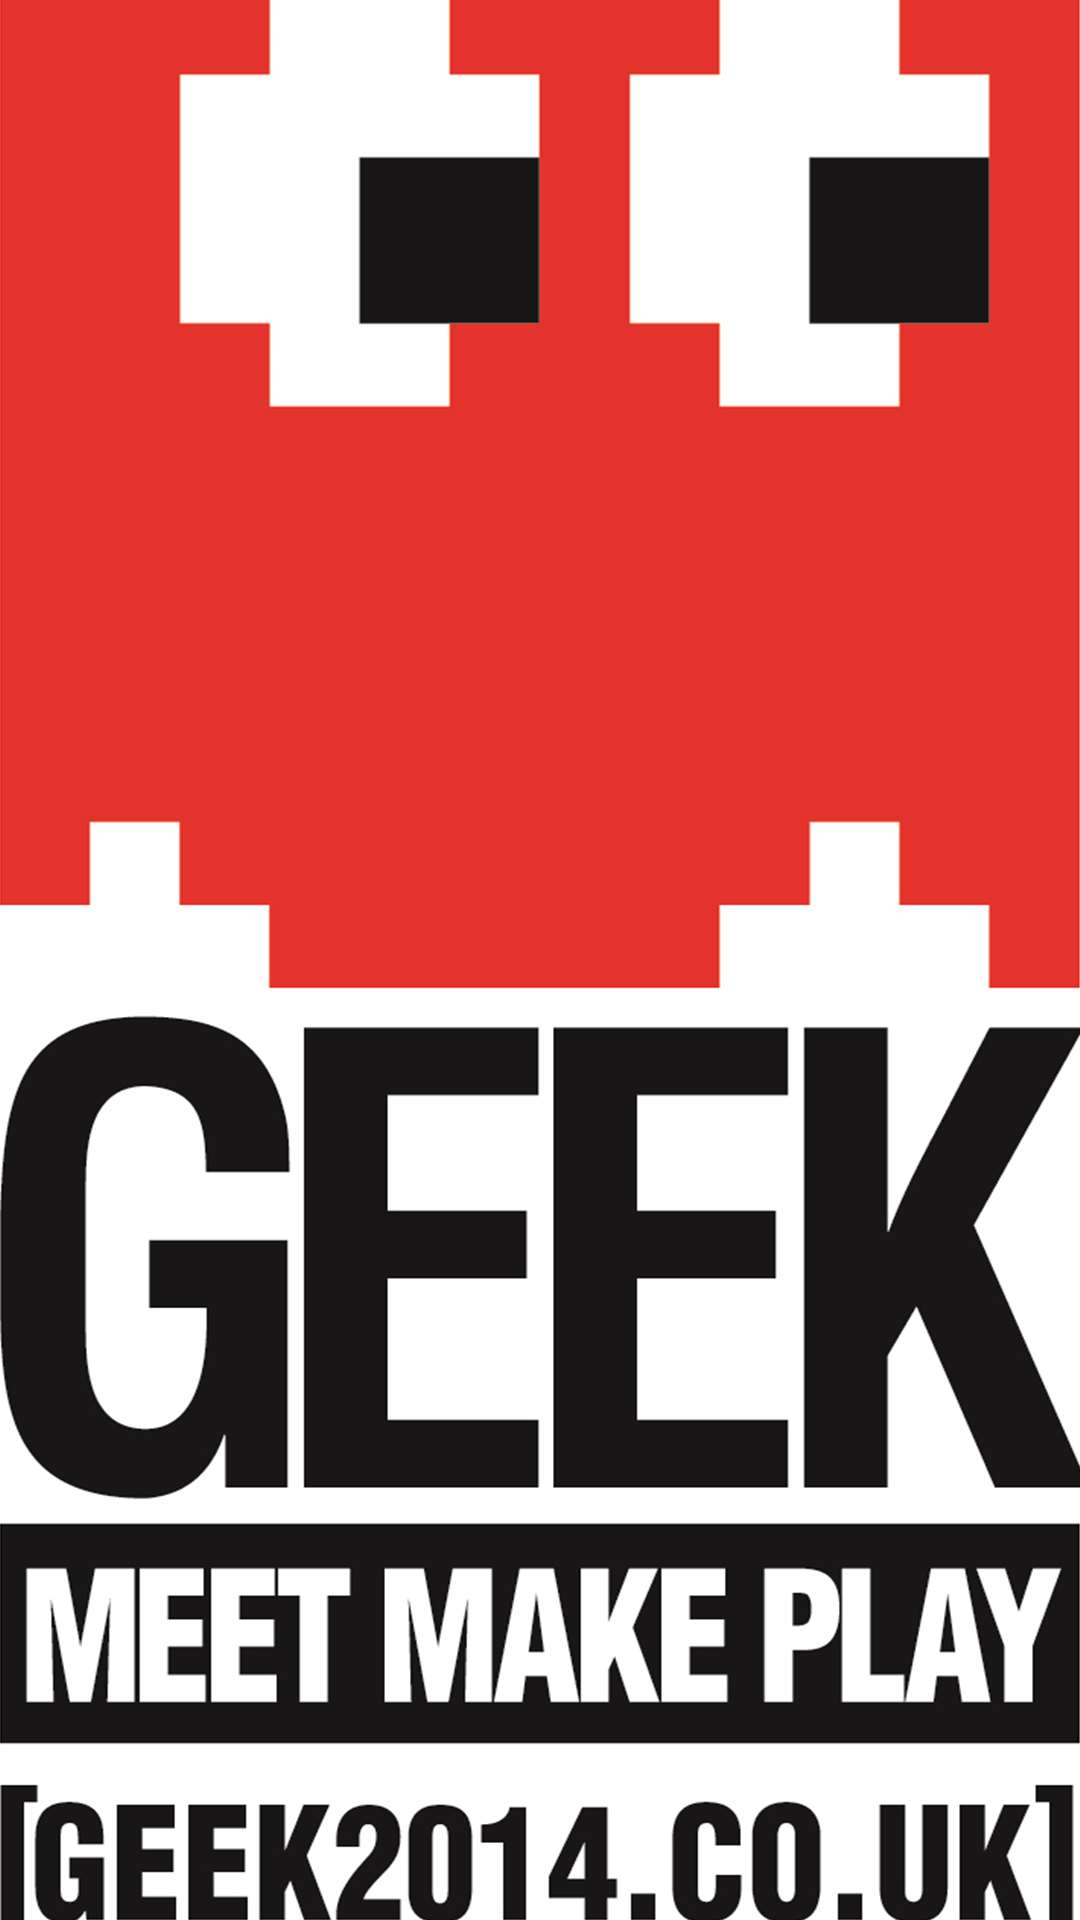 GEEK 2014: the south east's biggest gaming expo, coming to Margate's Winter Gardens in February 2014.